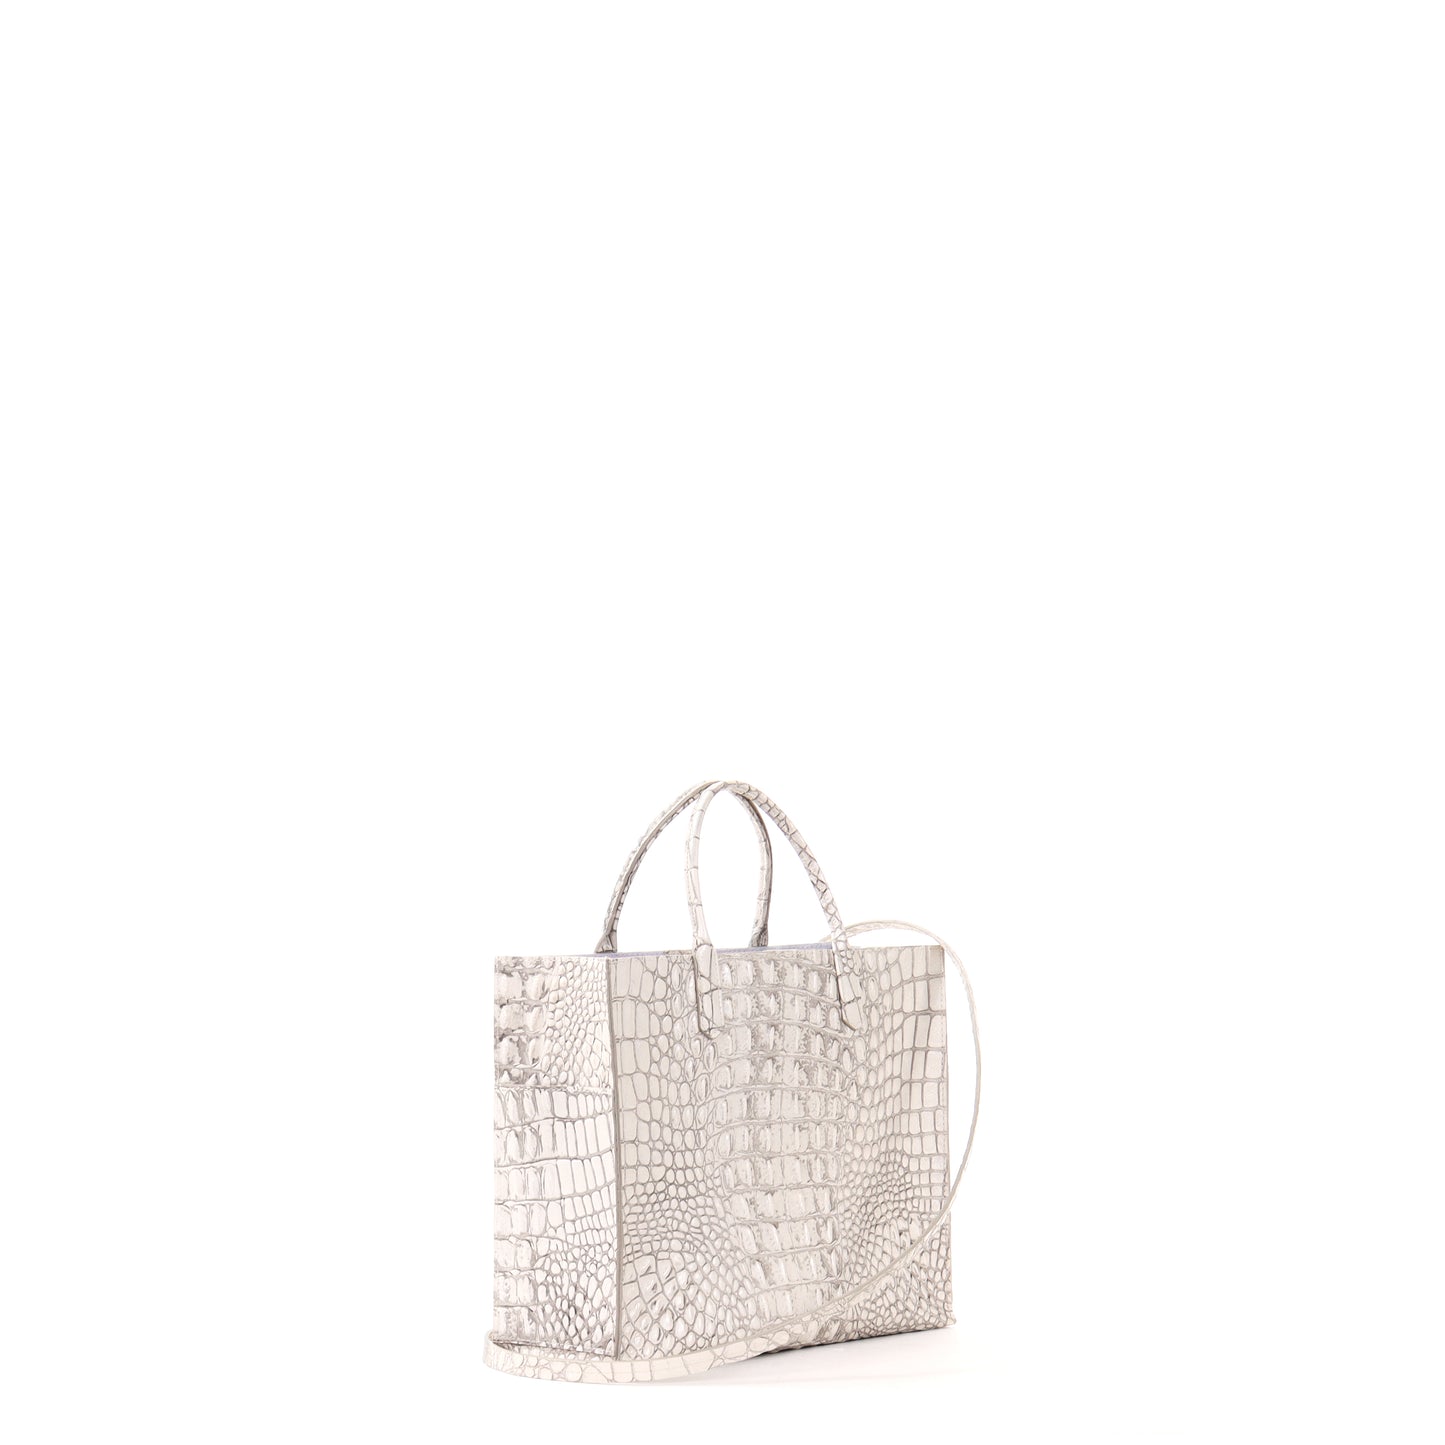 SMALL HARBOR TOTE OYSTER EMBOSSED CROC